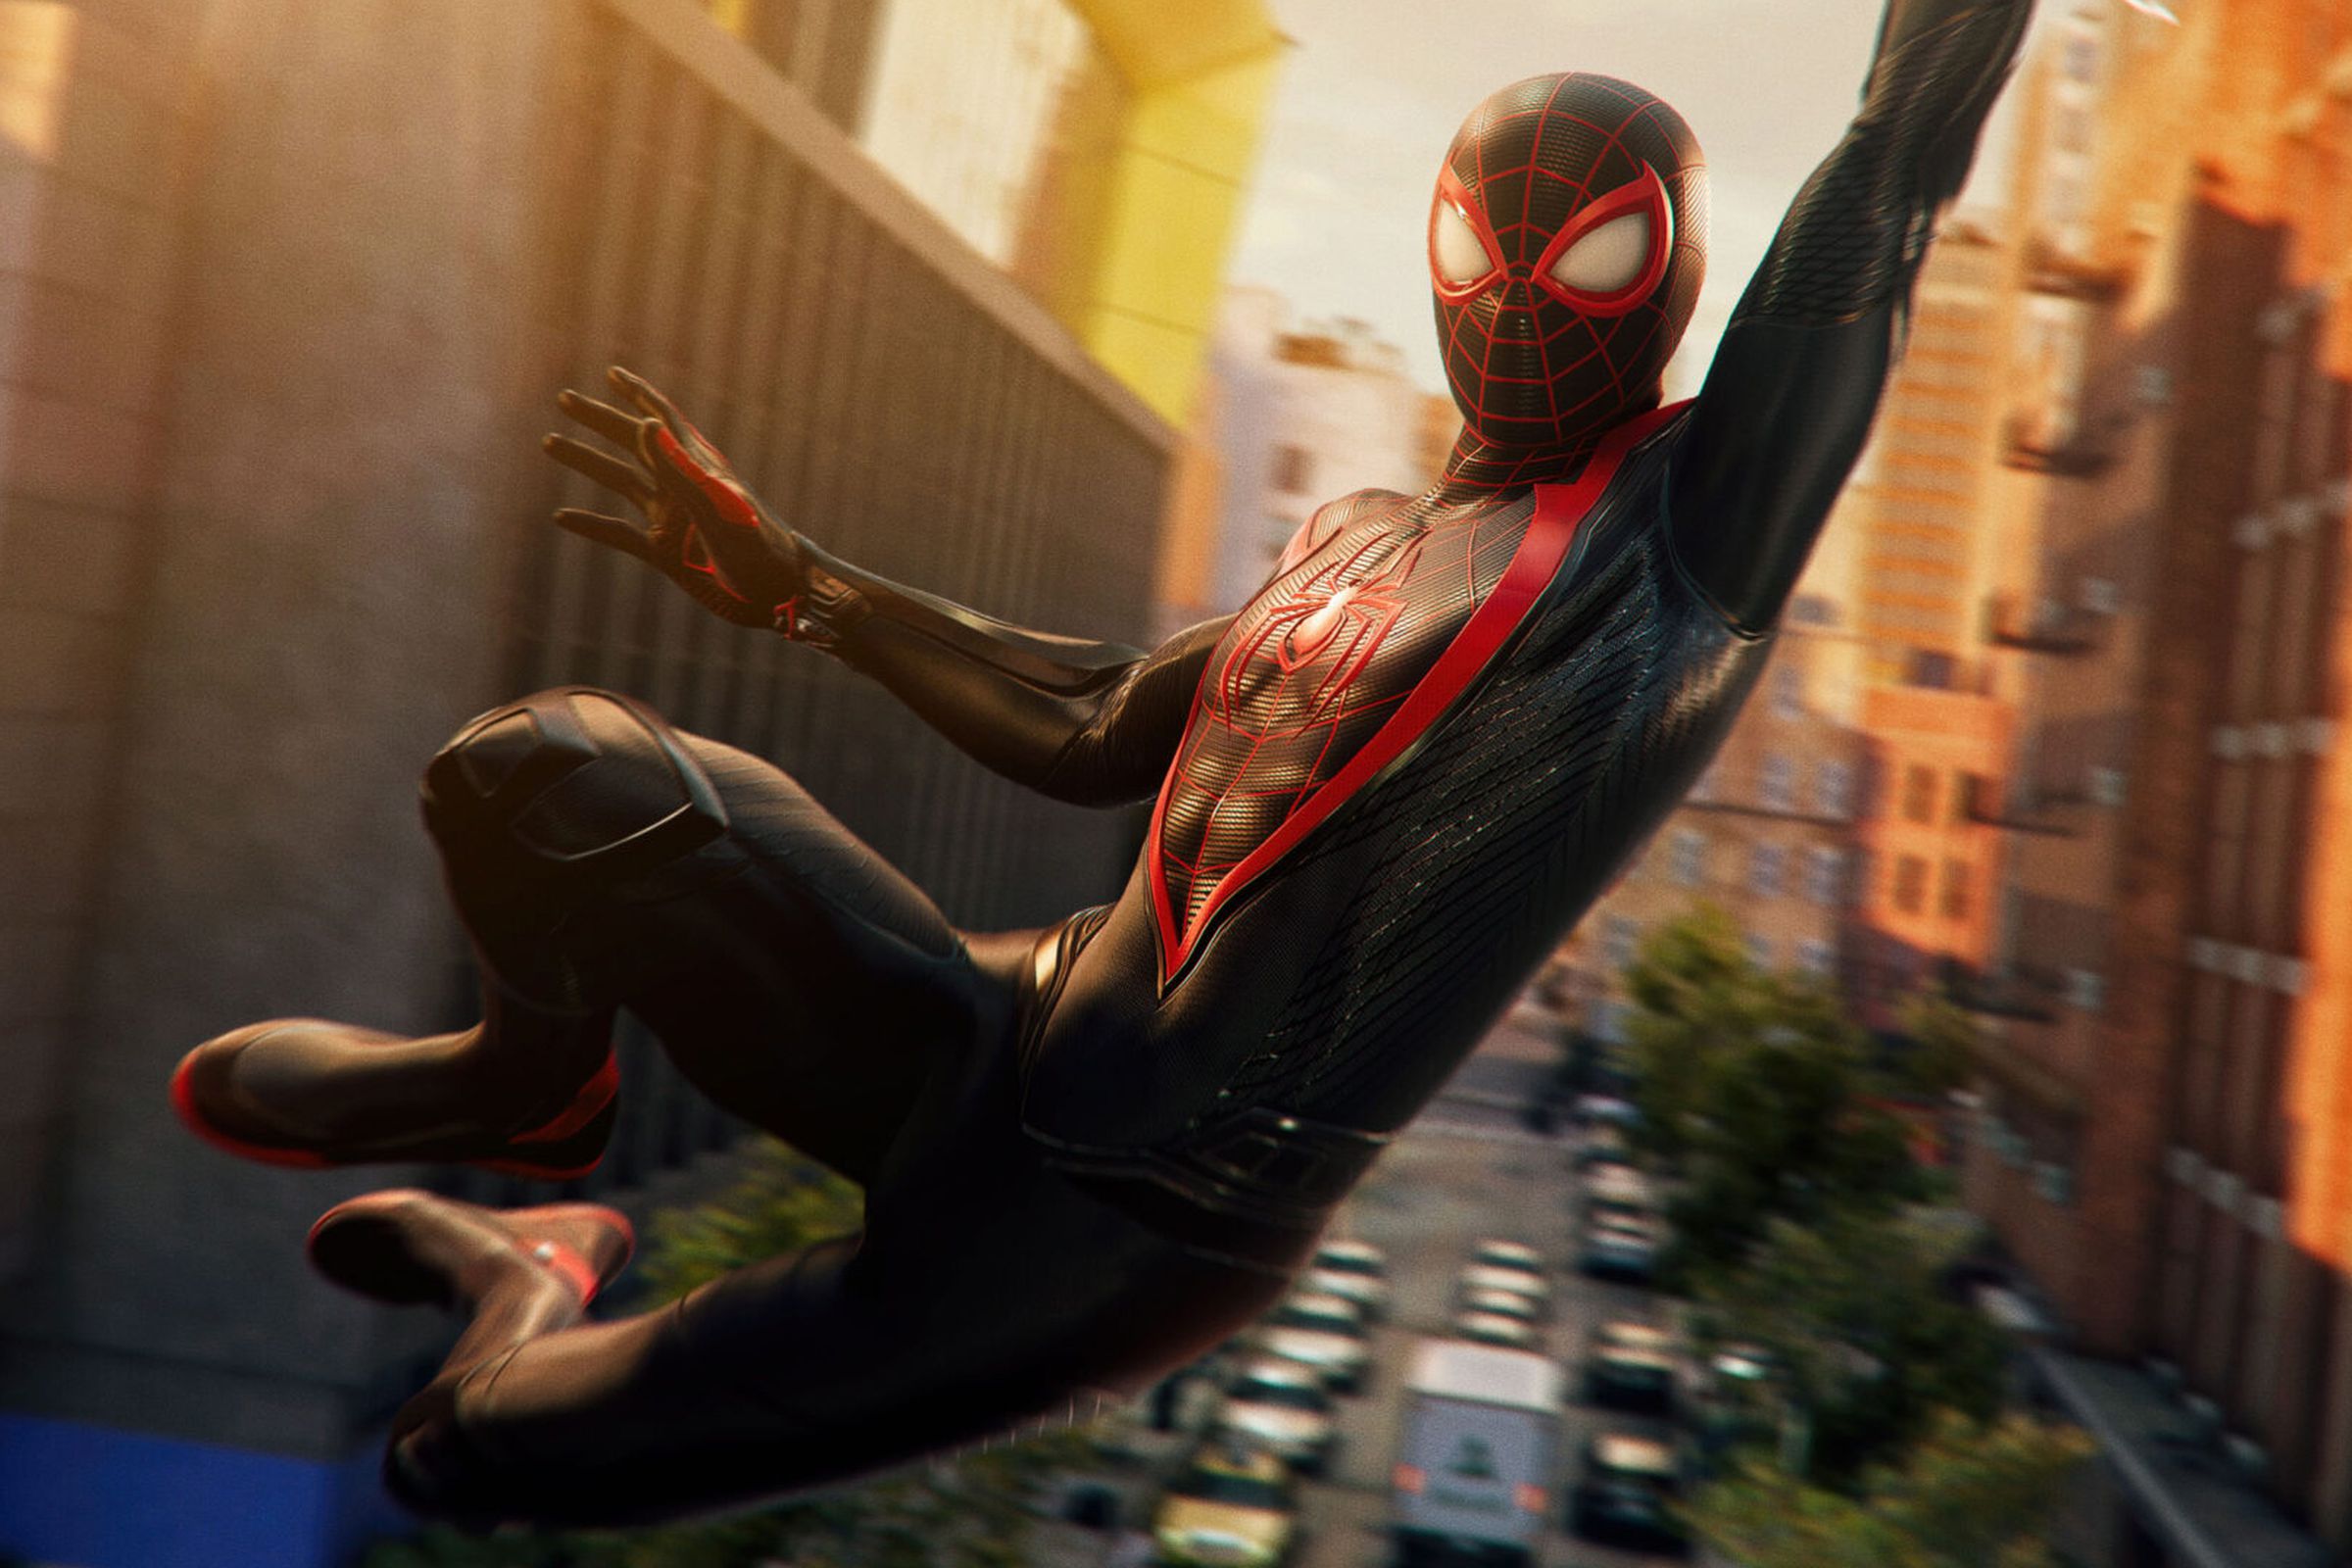 A close-up image of Spider-Man swinging through New York City during sunset.